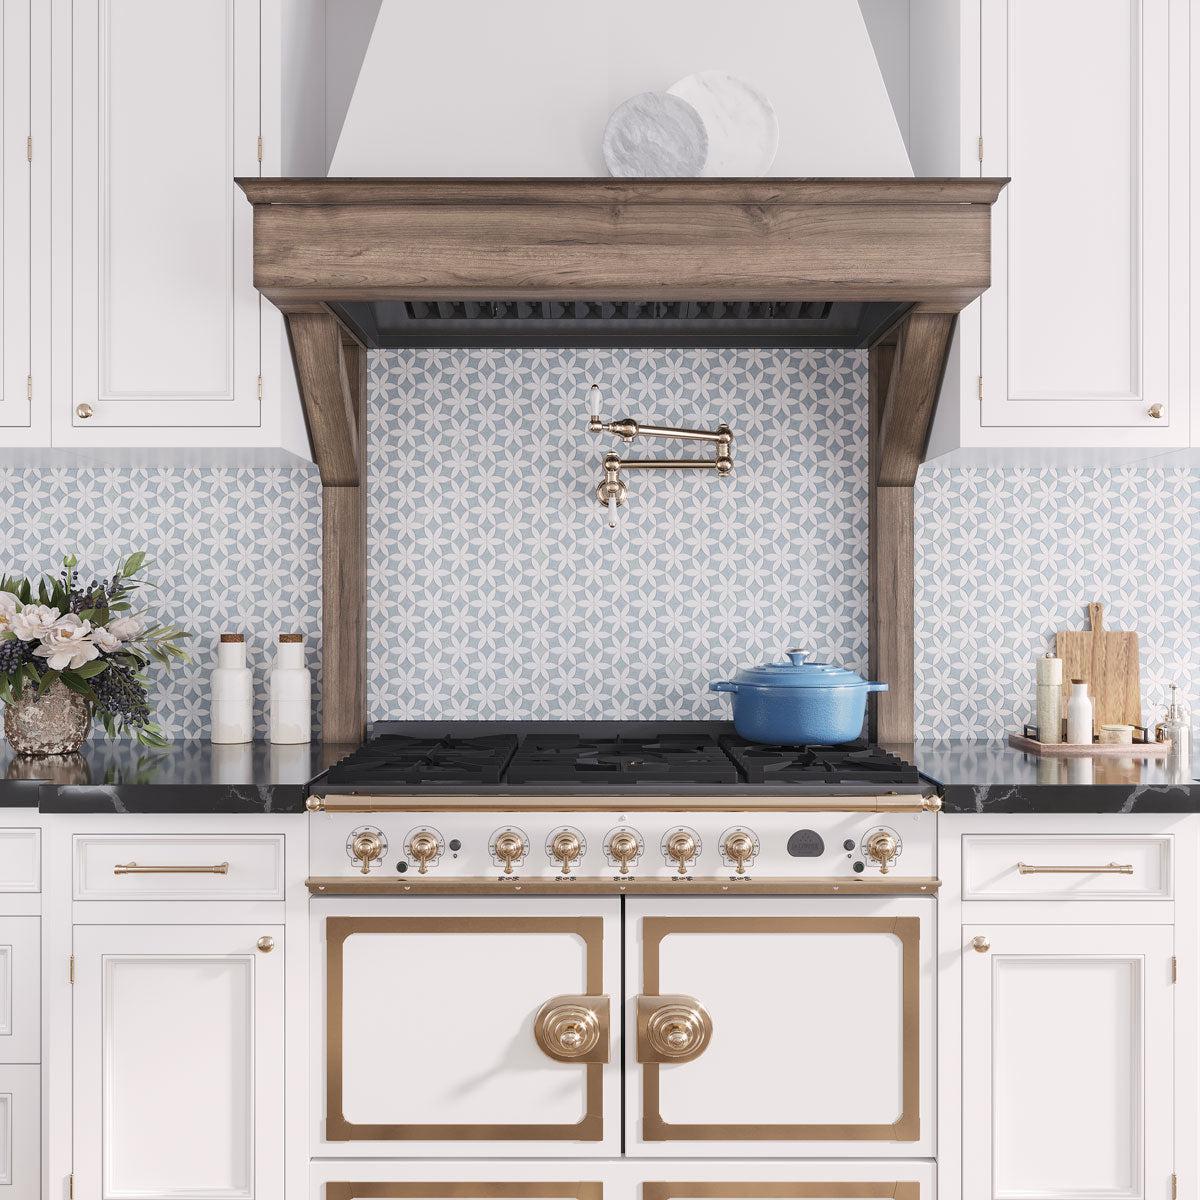 White and brass French kitchen style with Tile Club Blue Celeste and Thassos marble flower pattern tile backsplash in blue and white